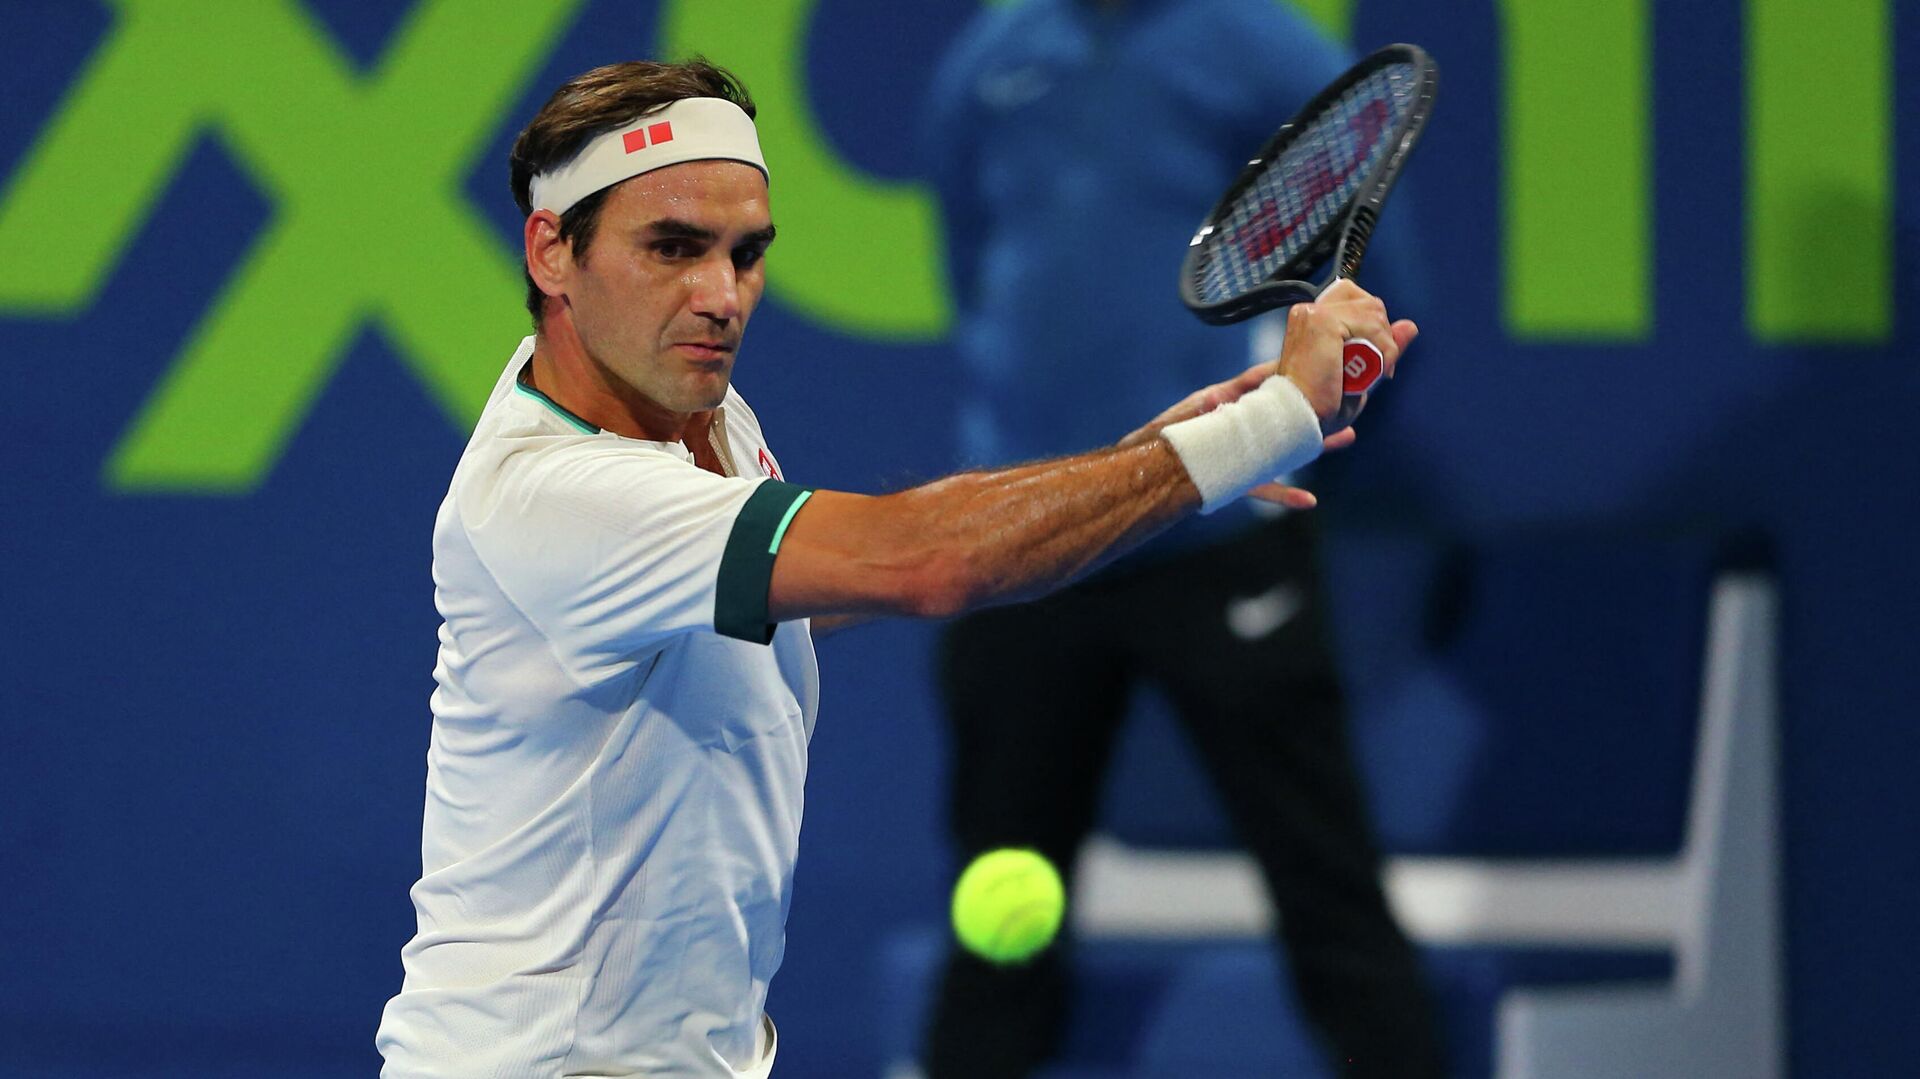 A handout picture obtained from the Qatar Tennis Federation on March 11, 2021, shows Roger Federer returns the ball during his match with Nikoloz Basilashvili of Georgia at the Qatar ExxonMobil Open at the Khalifa International Tennis and Squash Complex in the Qatari capital Doha. - Federer squandered a match point and was knocked out of the Qatar Open by Basilashvili in just his second match since a 13-month injury absence. (Photo by Samer Al-Rejjal / Qatar Tennis Federation / AFP) / RESTRICTED TO EDITORIAL USE - MANDATORY CREDIT AFP PHOTO / QATAR TENNIS FEDERATION  - NO MARKETING - NO ADVERTISING CAMPAIGNS - DISTRIBUTED AS A SERVICE TO CLIENTS - РИА Новости, 1920, 15.05.2021